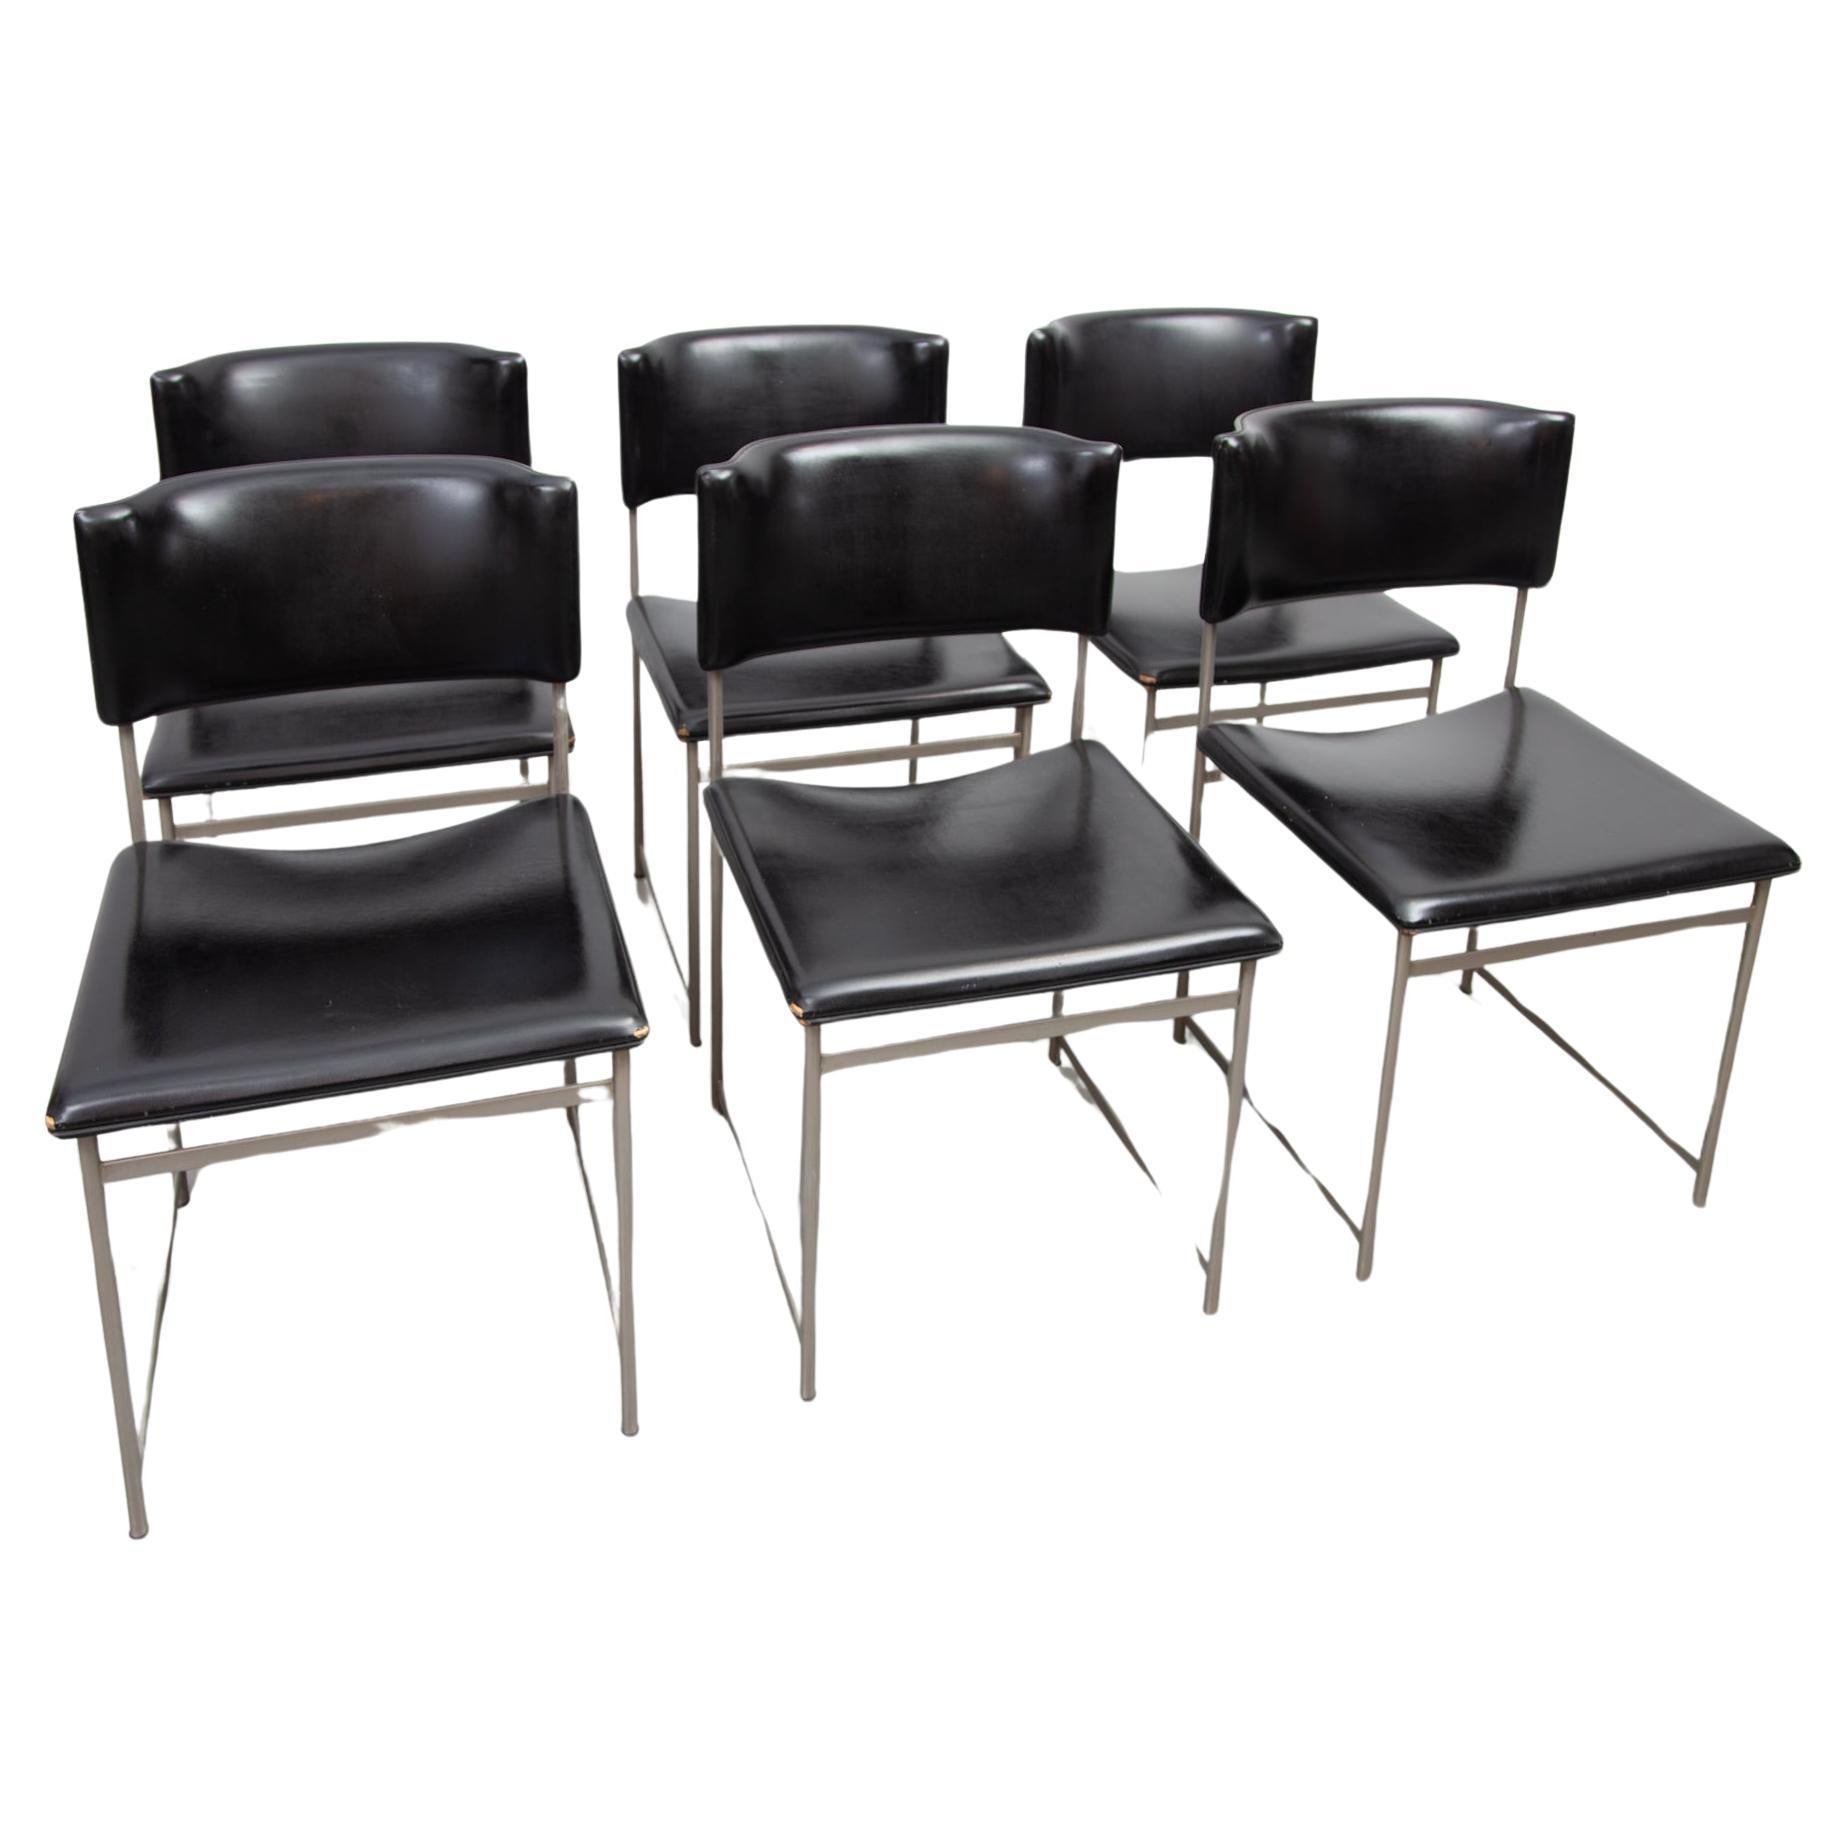  Cees Braakman for Pastoe Set of Six  SM08 Dining Chairs in Black Leather. For Sale